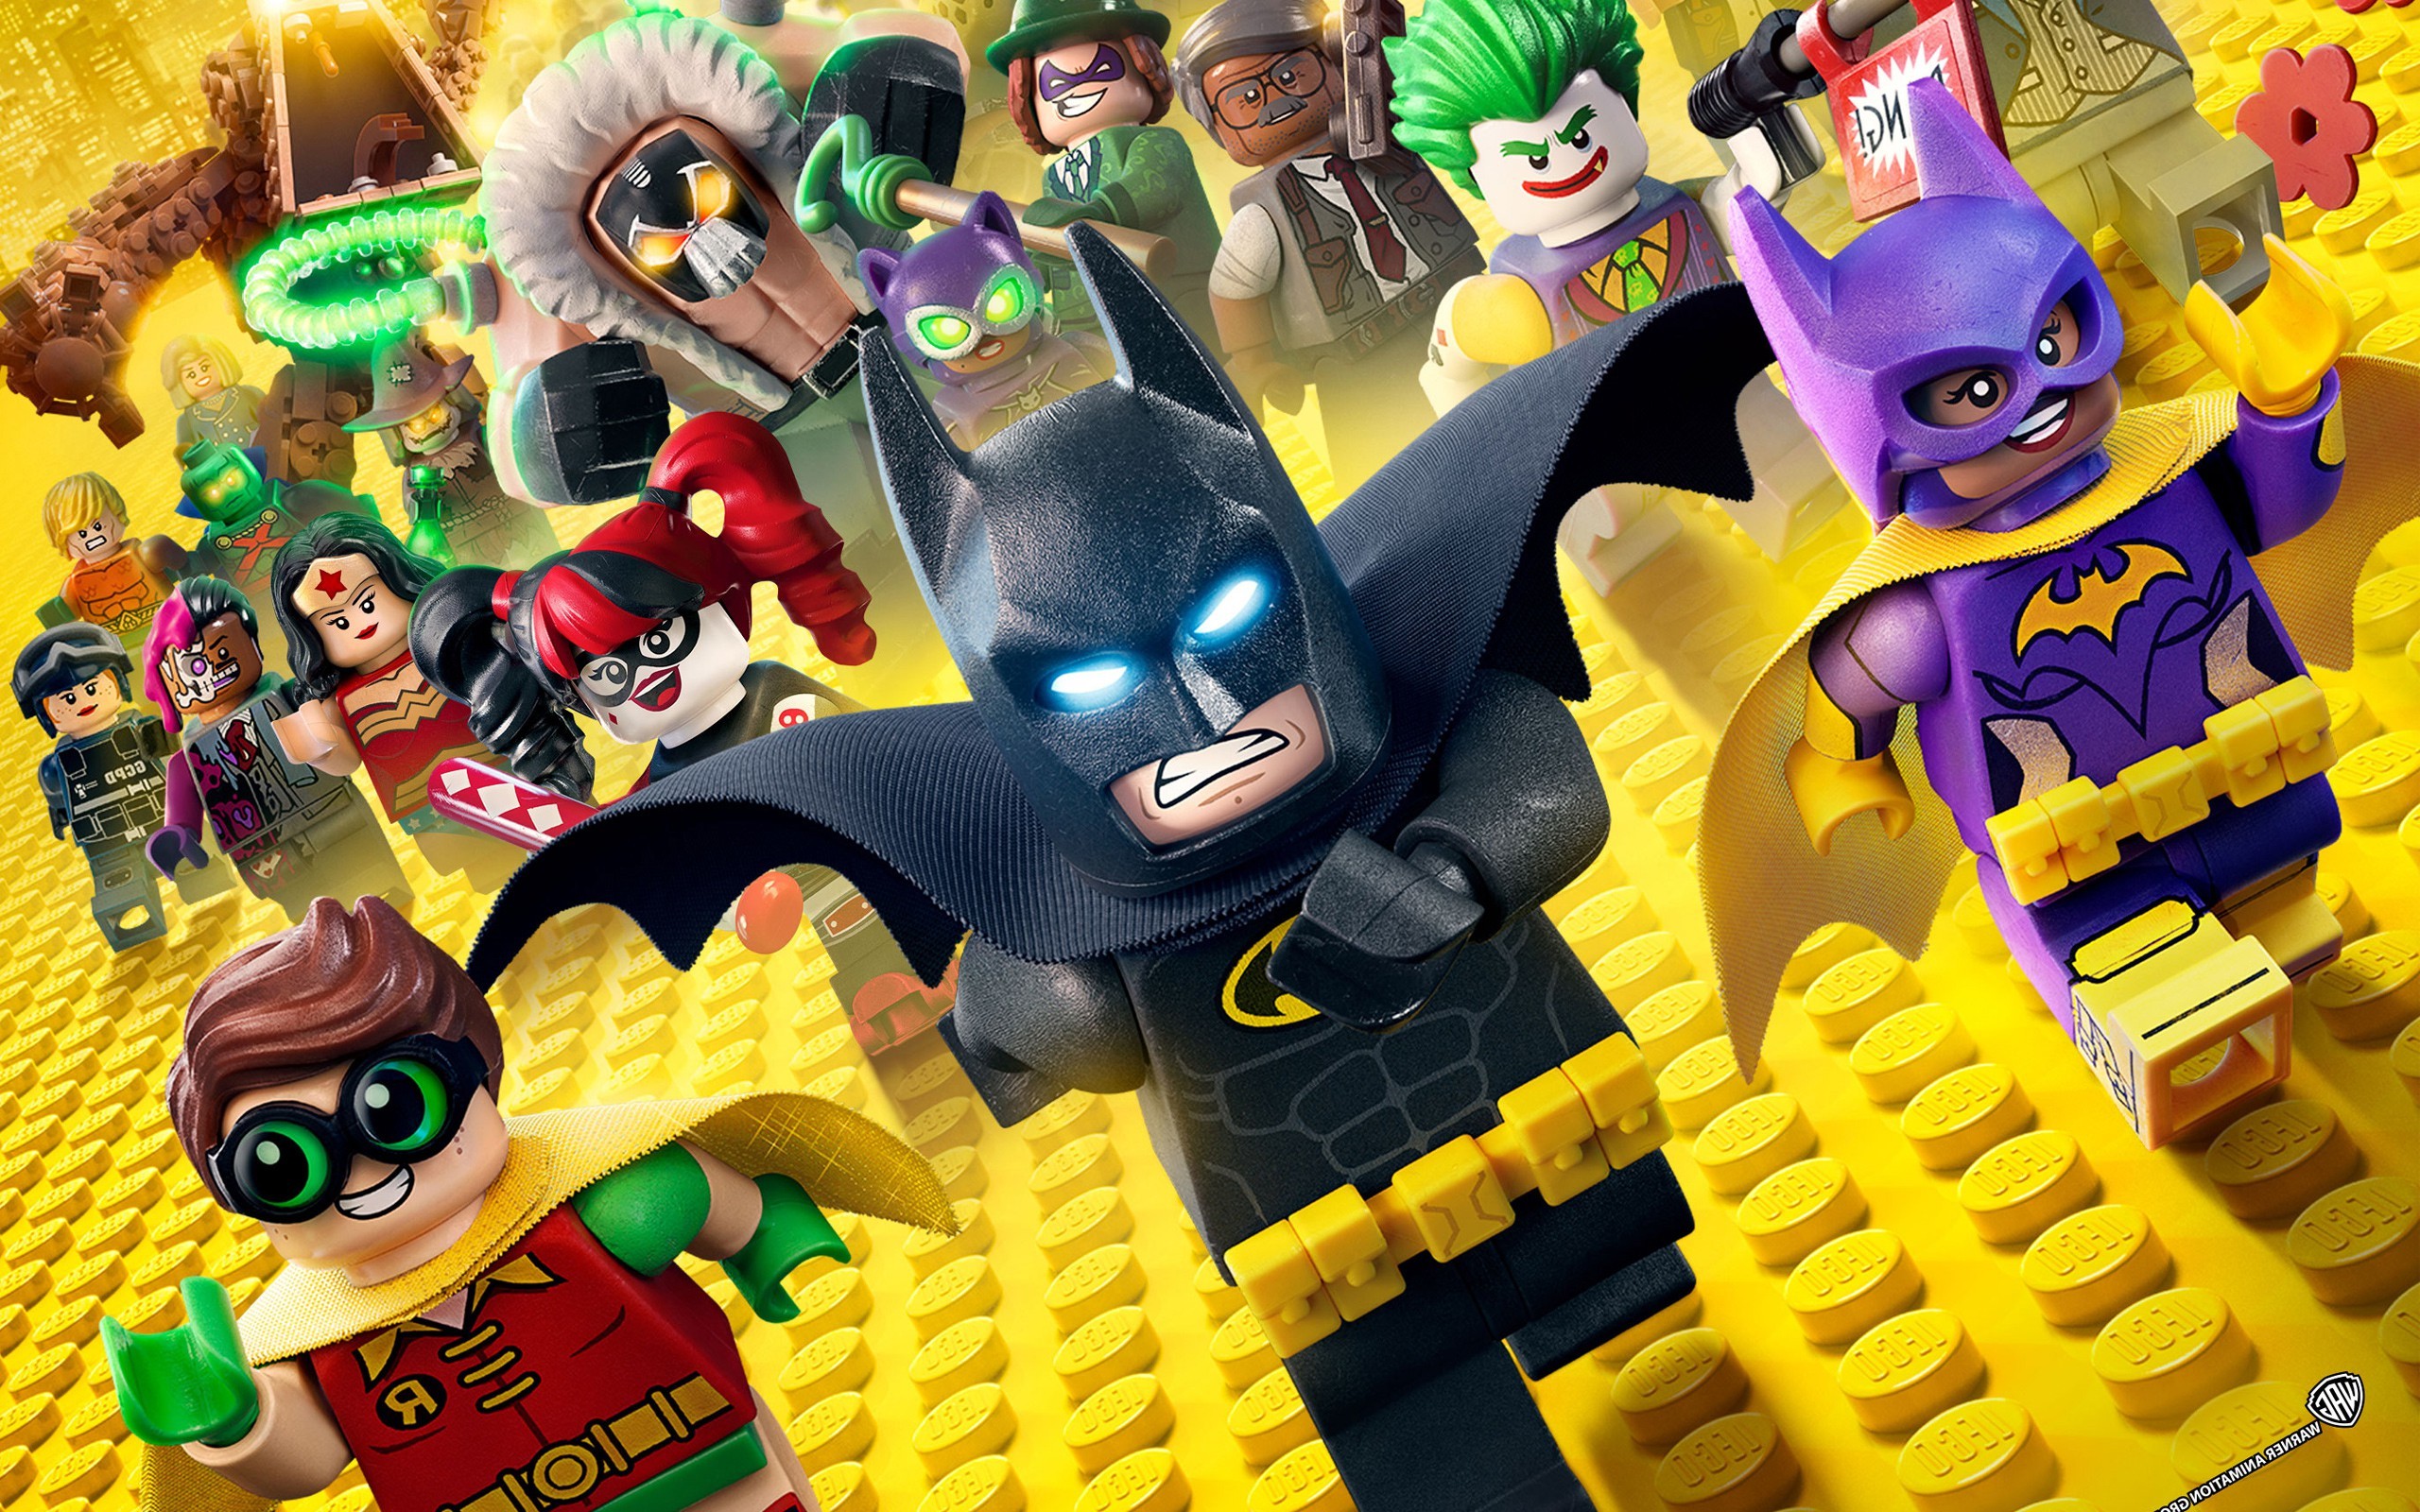 2560x1600 The Lego Batman Movie Review – A Form of Perfection